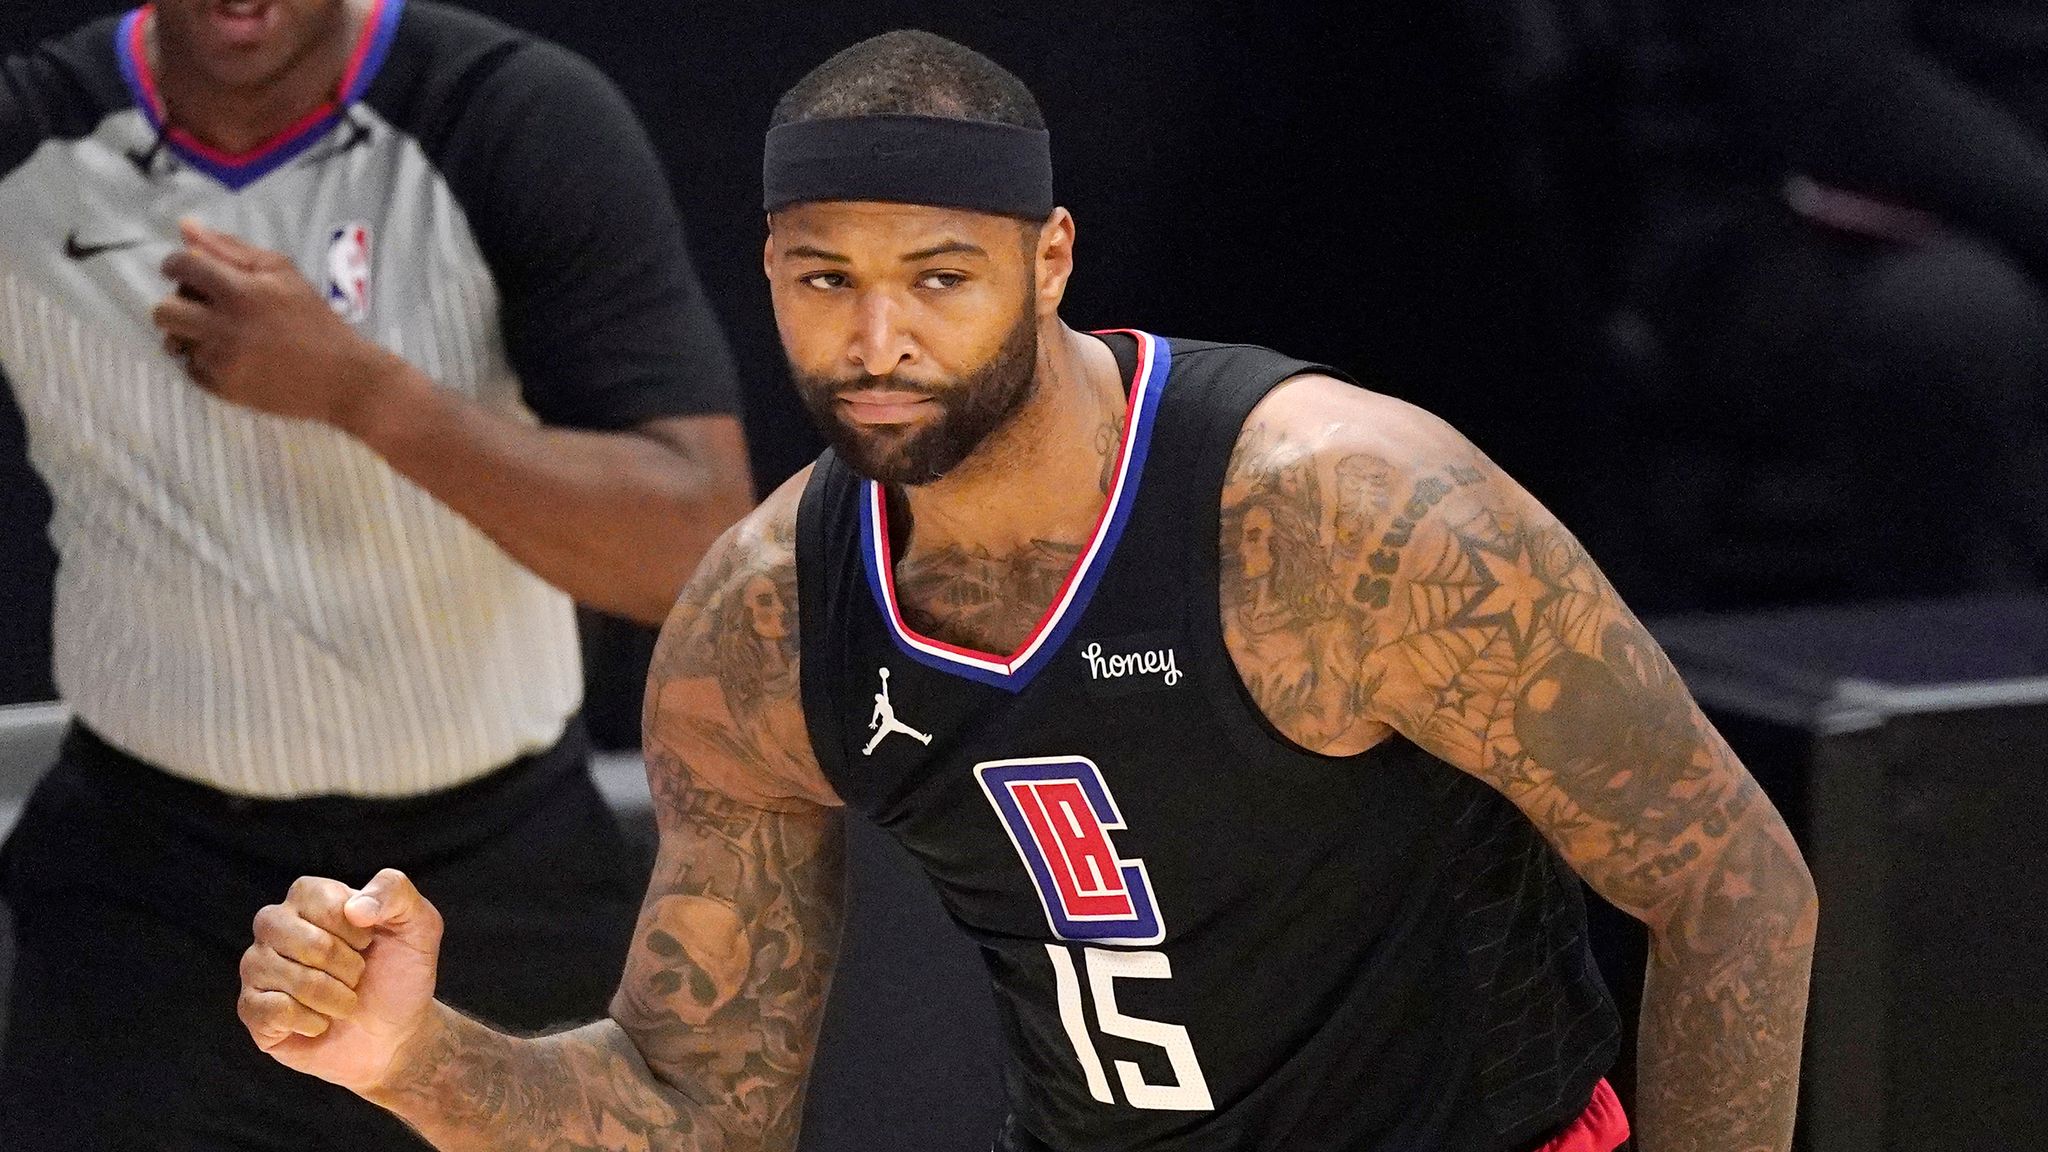 Kentucky basketball  Former star DeMarcus Cousins out for the year